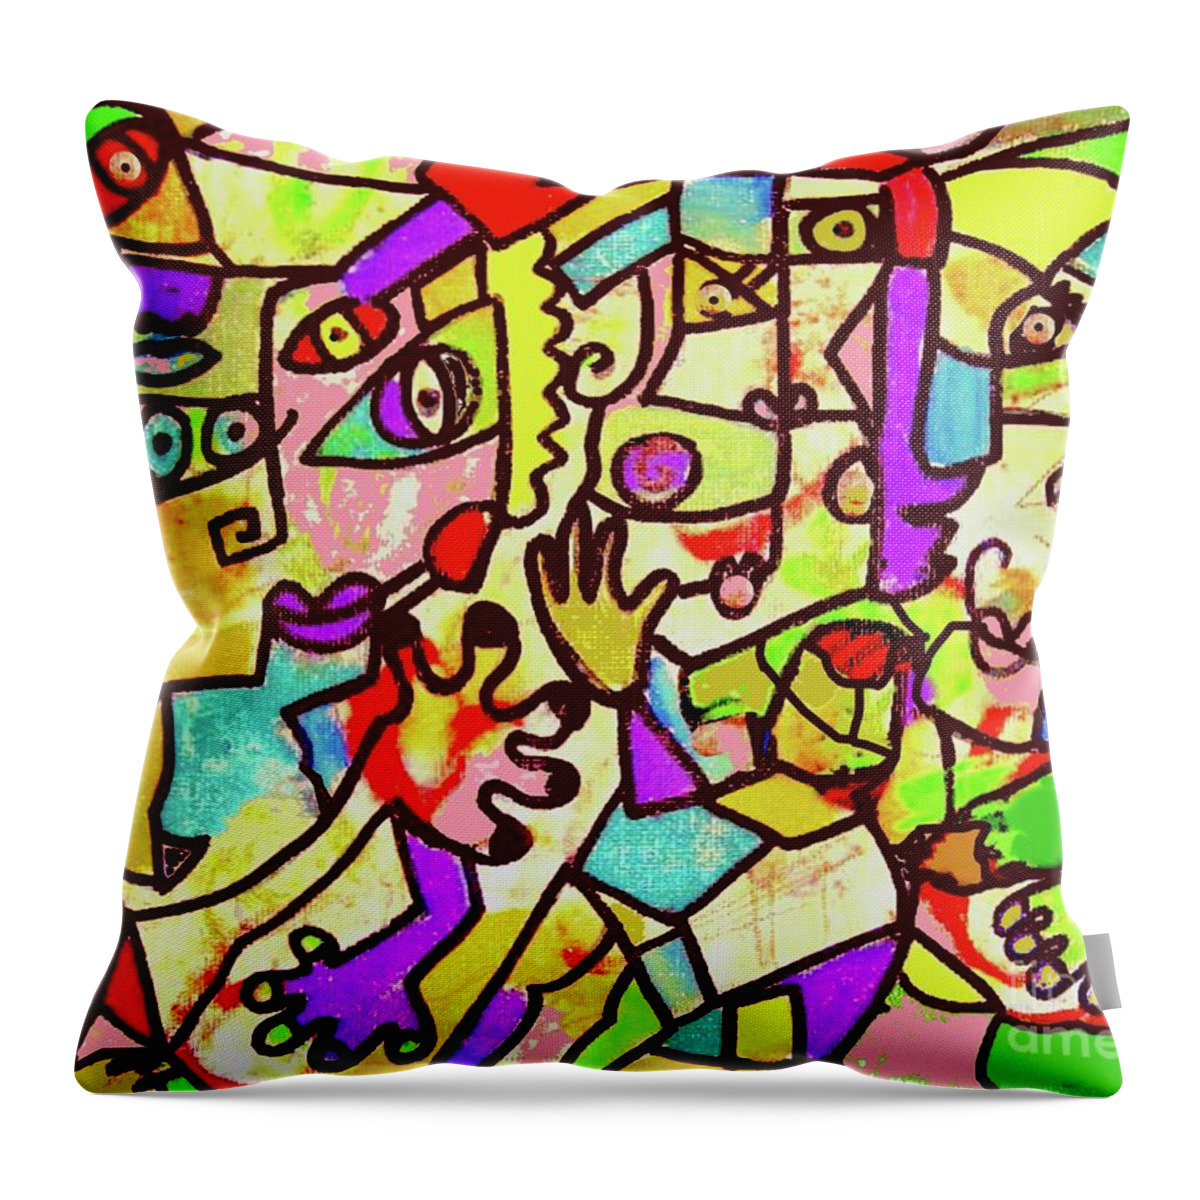 Sandra Silberzweig Throw Pillow featuring the painting Emotional Commotional Collision by Sandra Silberzweig